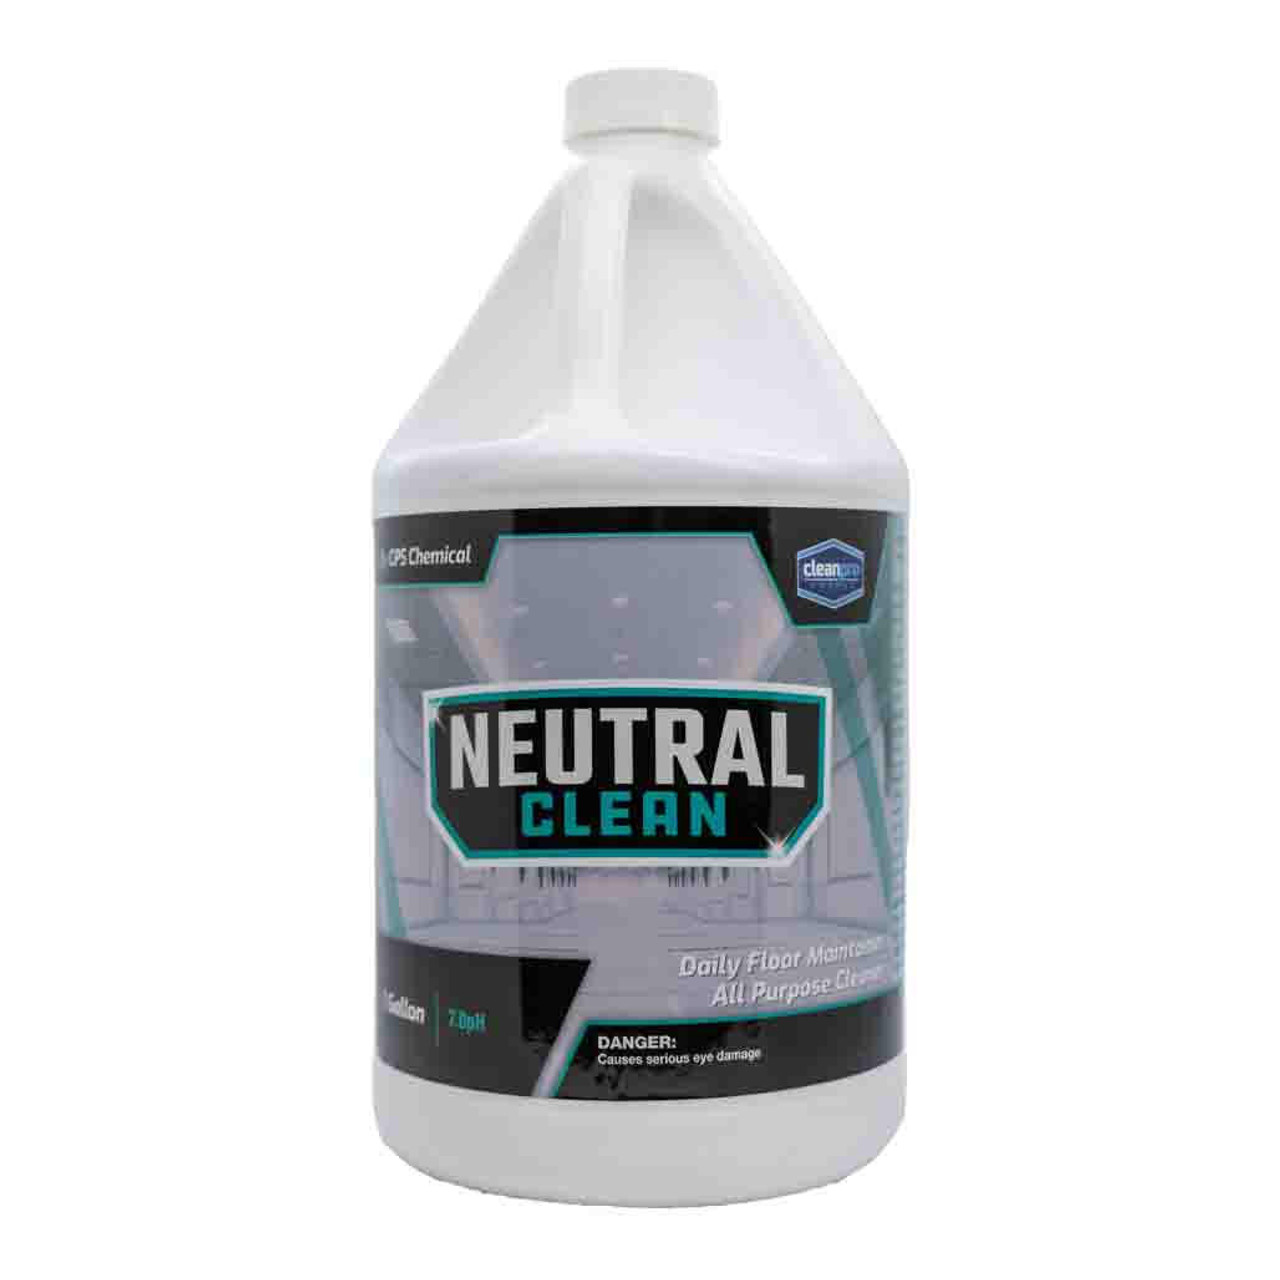 CleanPro Chemical CPS Neutral Clean Concentrated Hard Surface and Epoxy Floor Cleaner - 1 Gallon